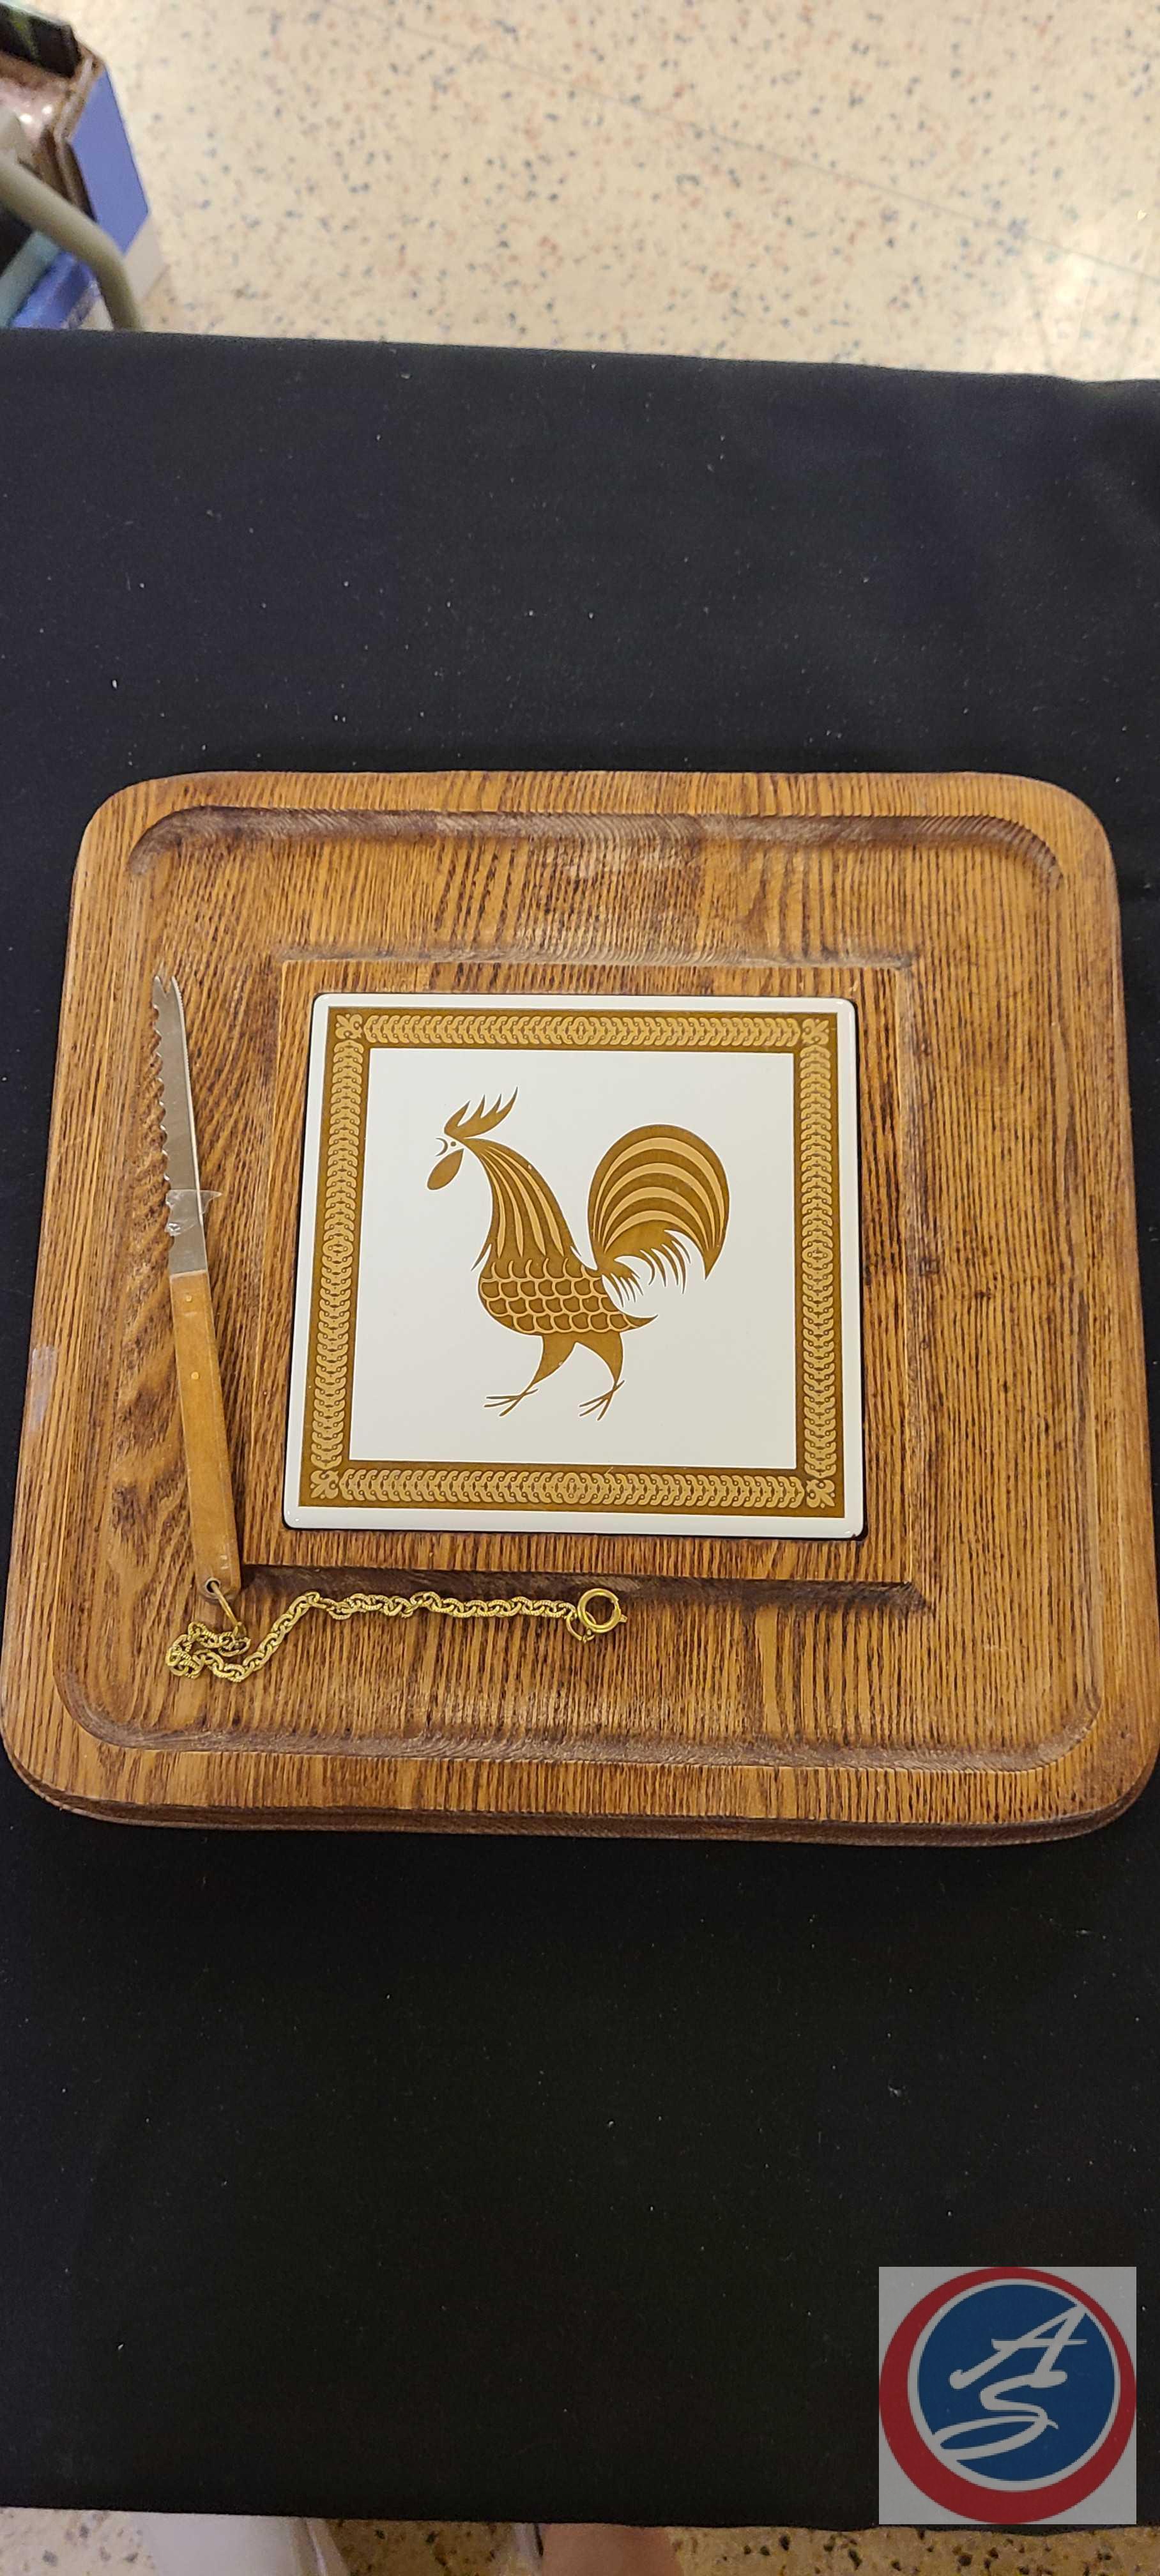 (1)...Vintage Wood Cheese/Bread Serving Board White Gold Rooster Tile Georges Briard, (1) Heart Chal